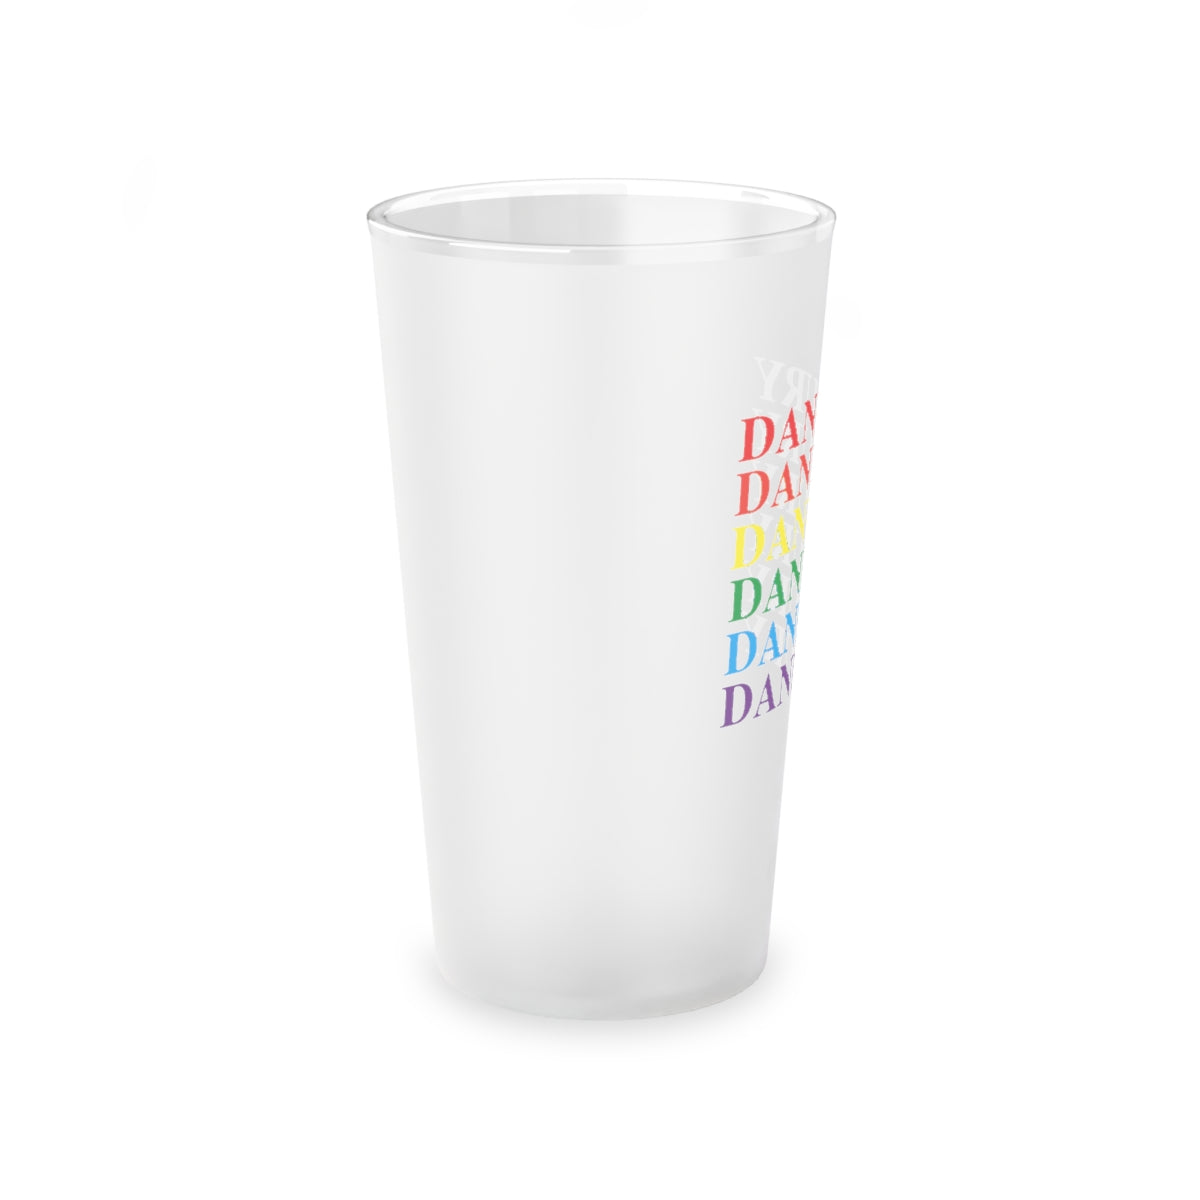 Danbury Pride Frosted Pint Glass, 16oz